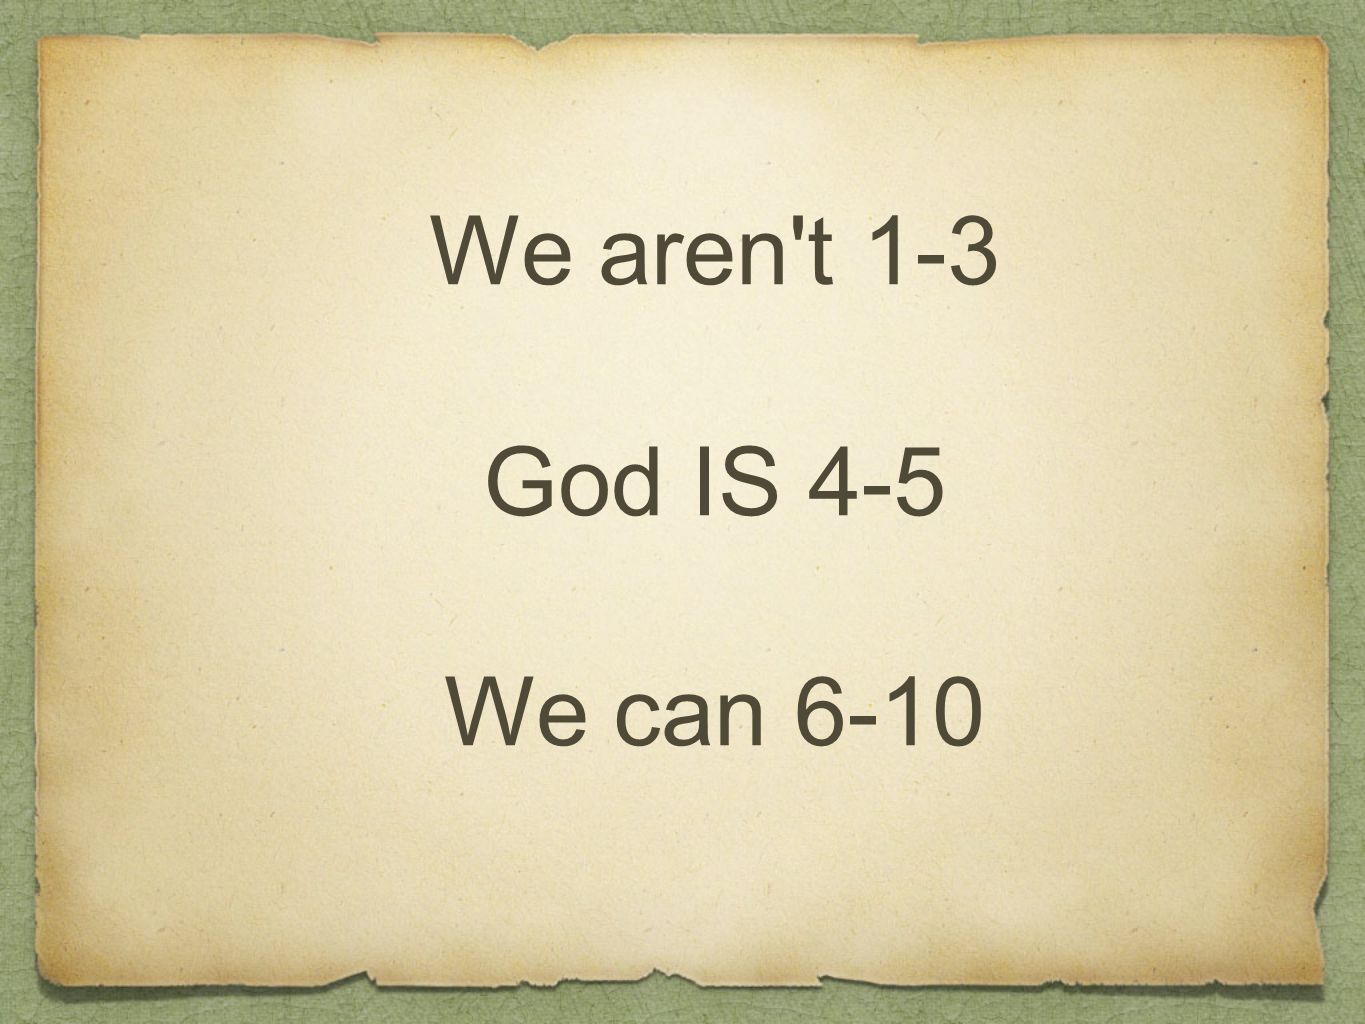 We aren t 1-3 God IS 4-5 We can 6-10